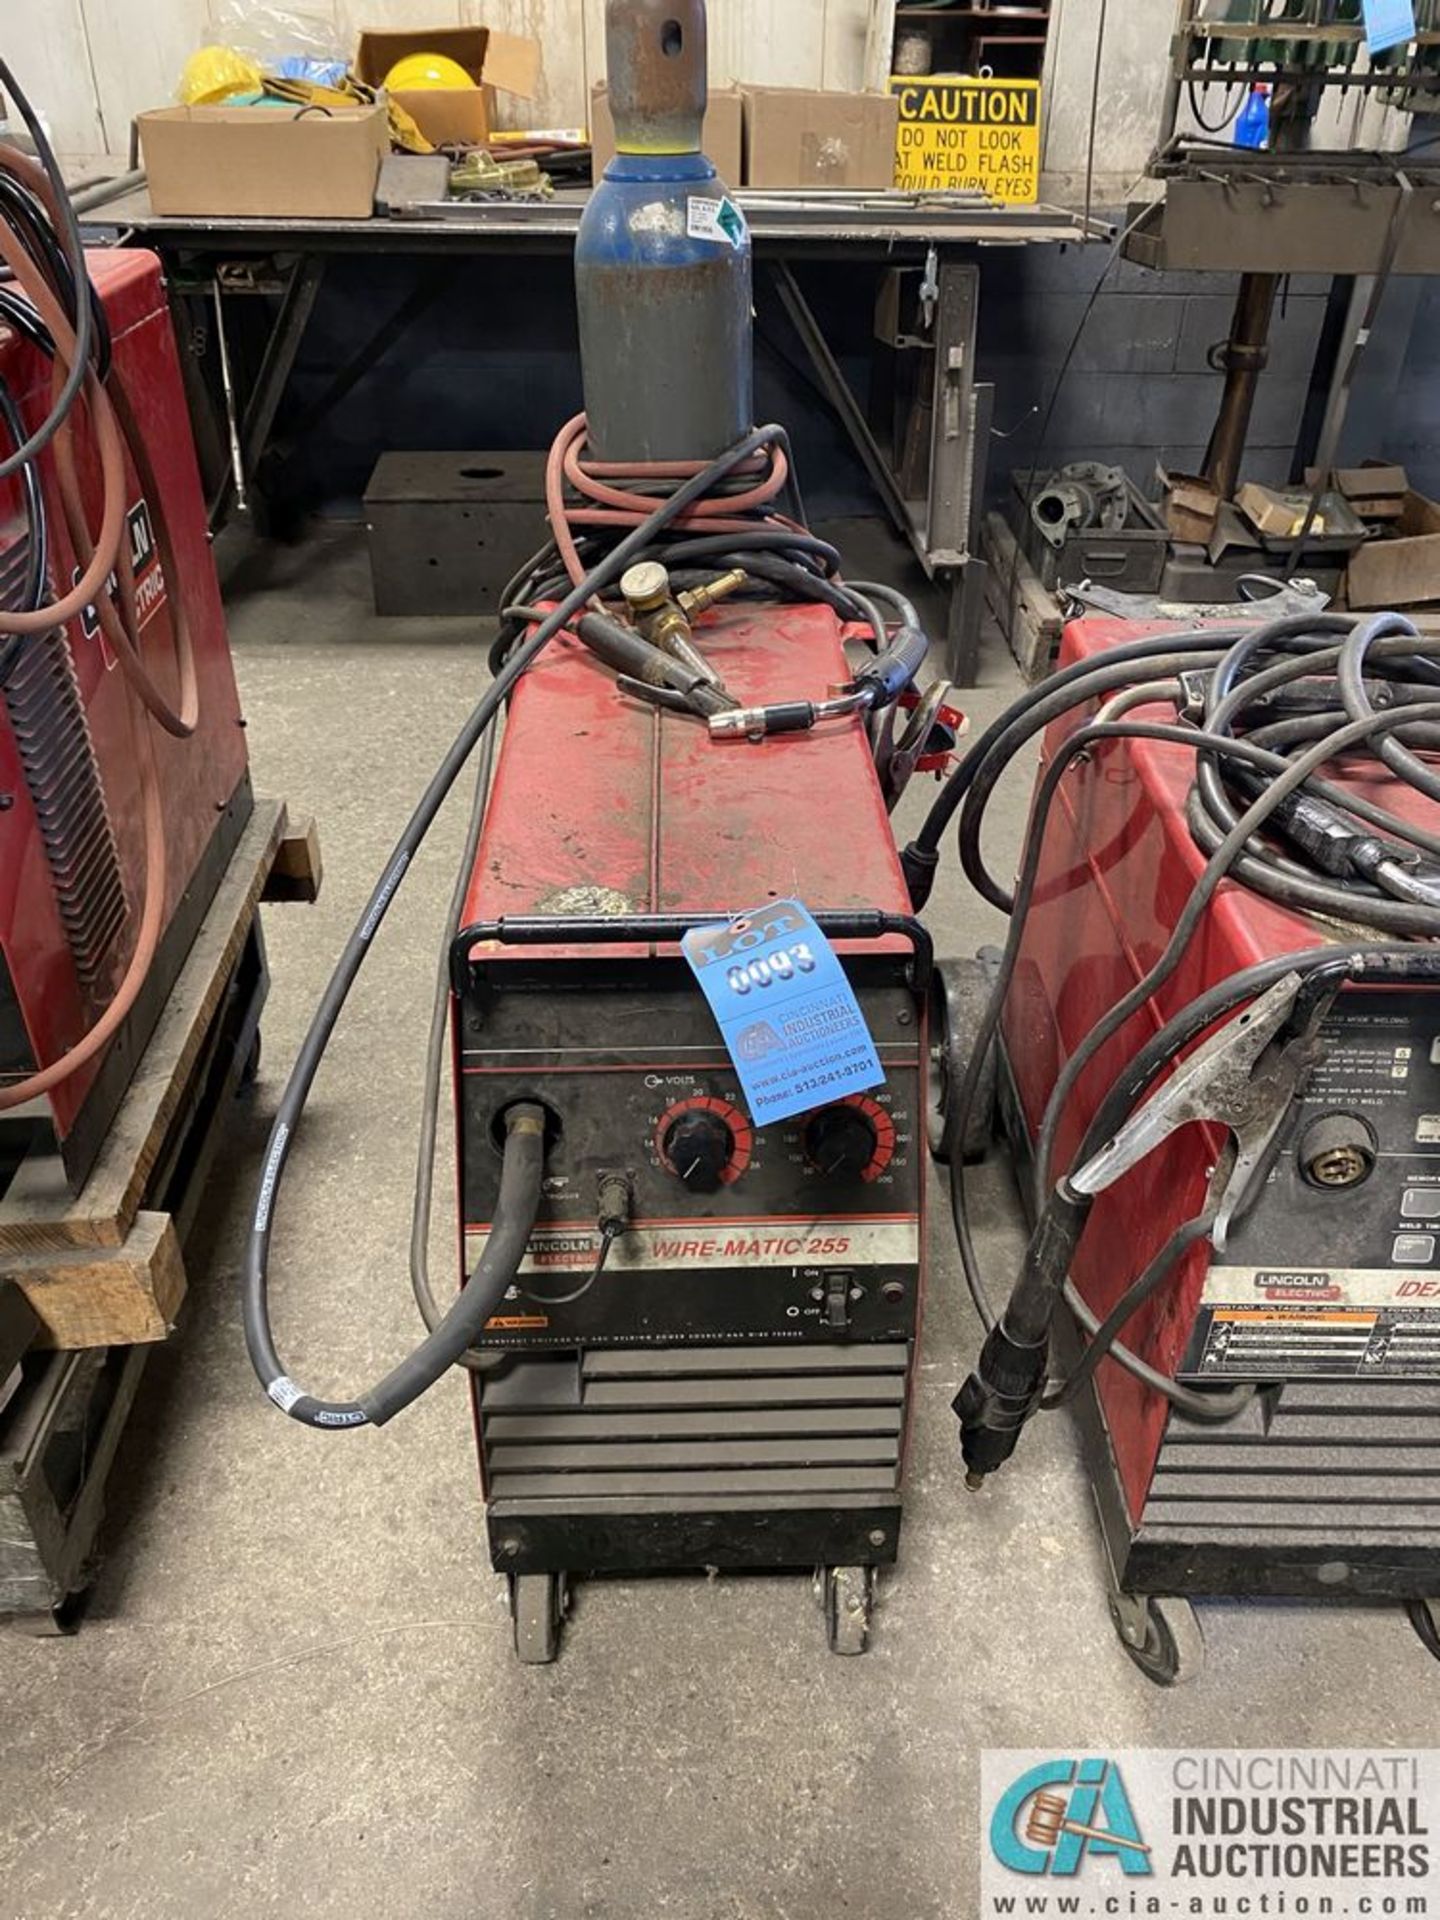 LINCOLN WIRE-MATIC 255 WELDER WITH BUILT IN WIRE FEED